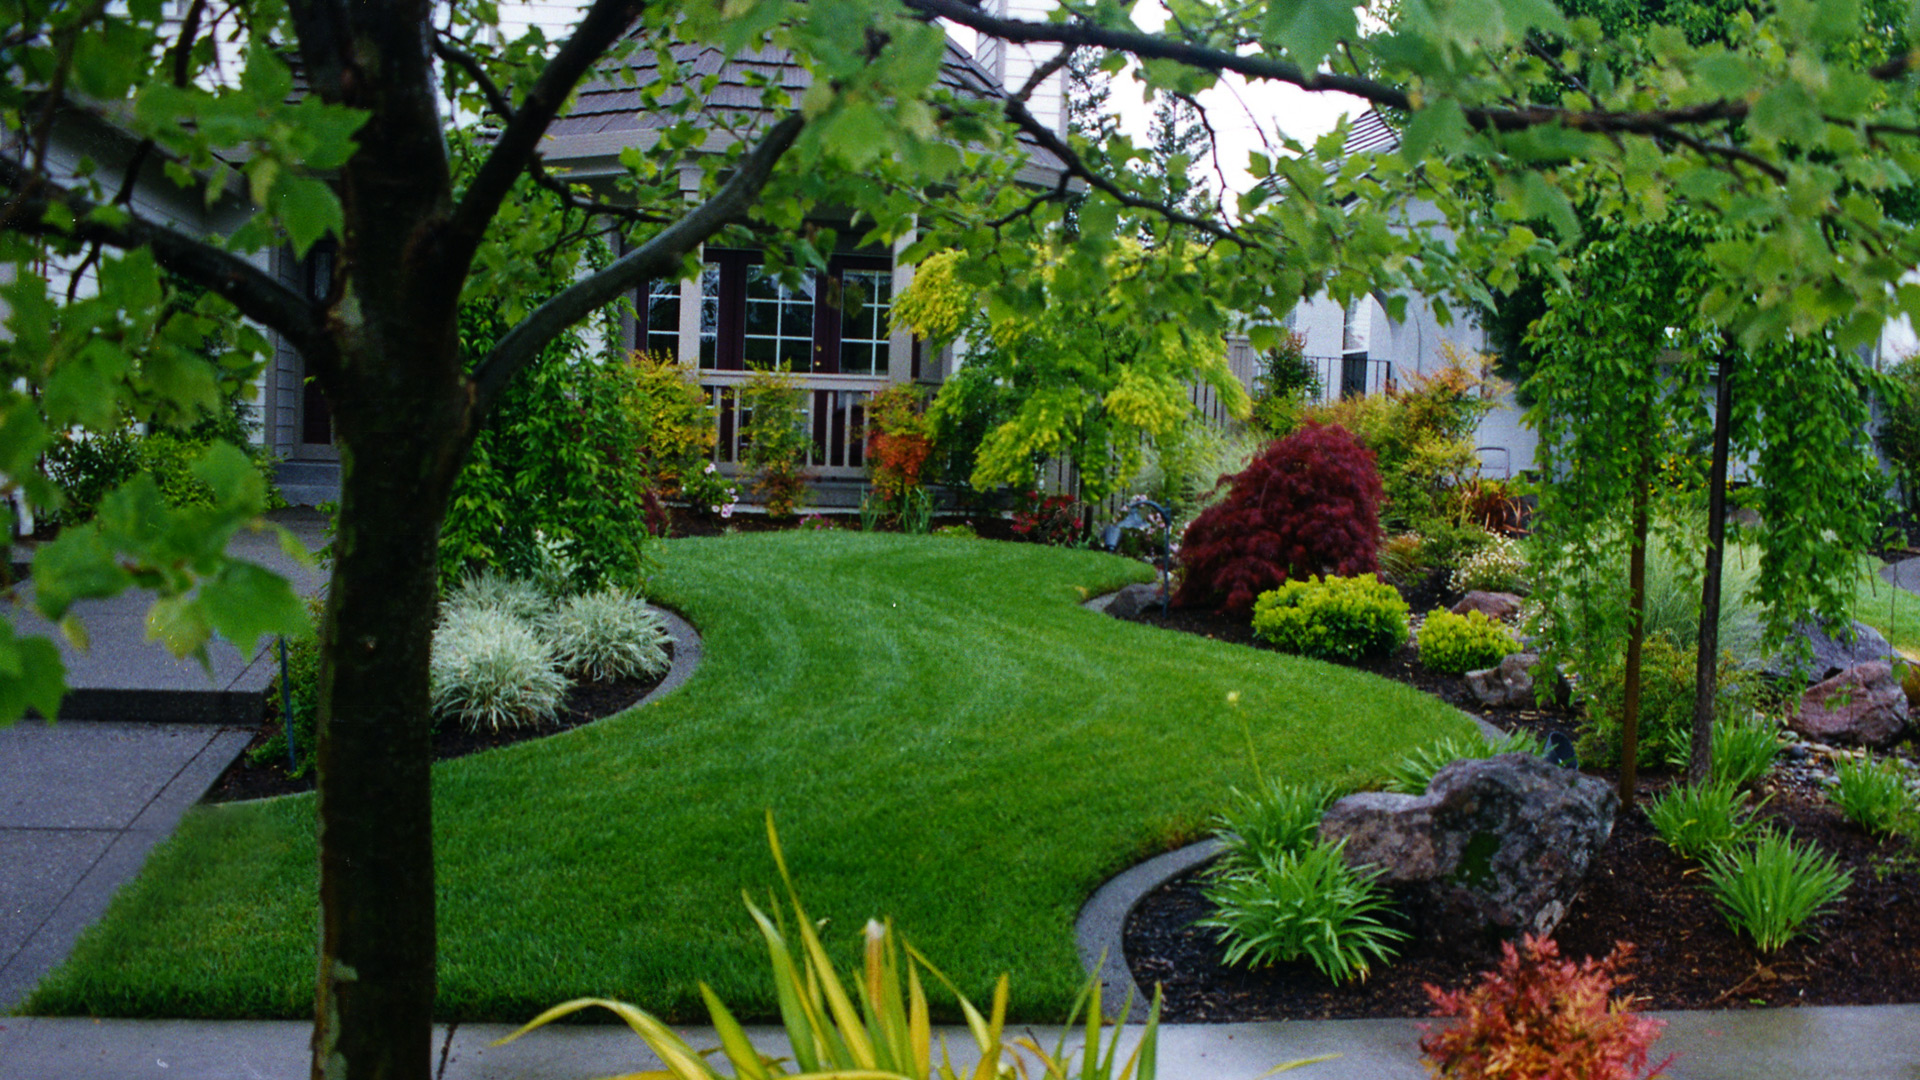 A lush sweeping front yard lawn with colorful foliage plants